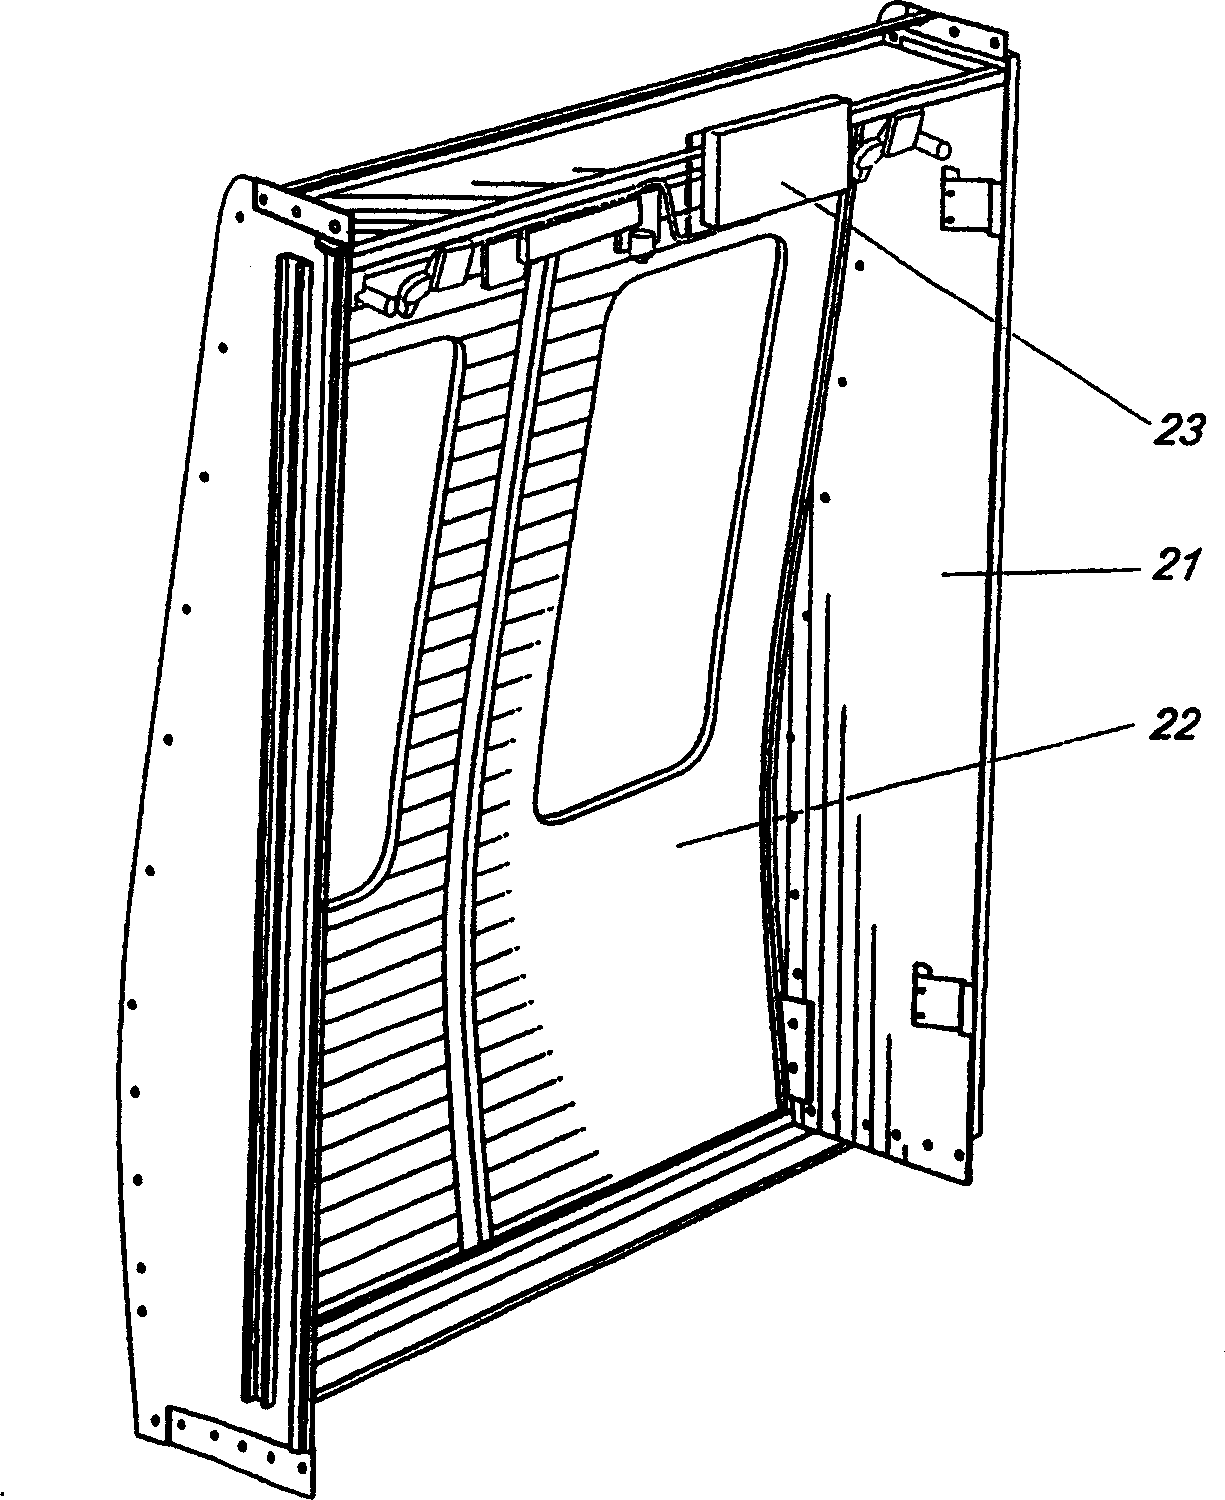 Rail vehicle carbody of modular construction